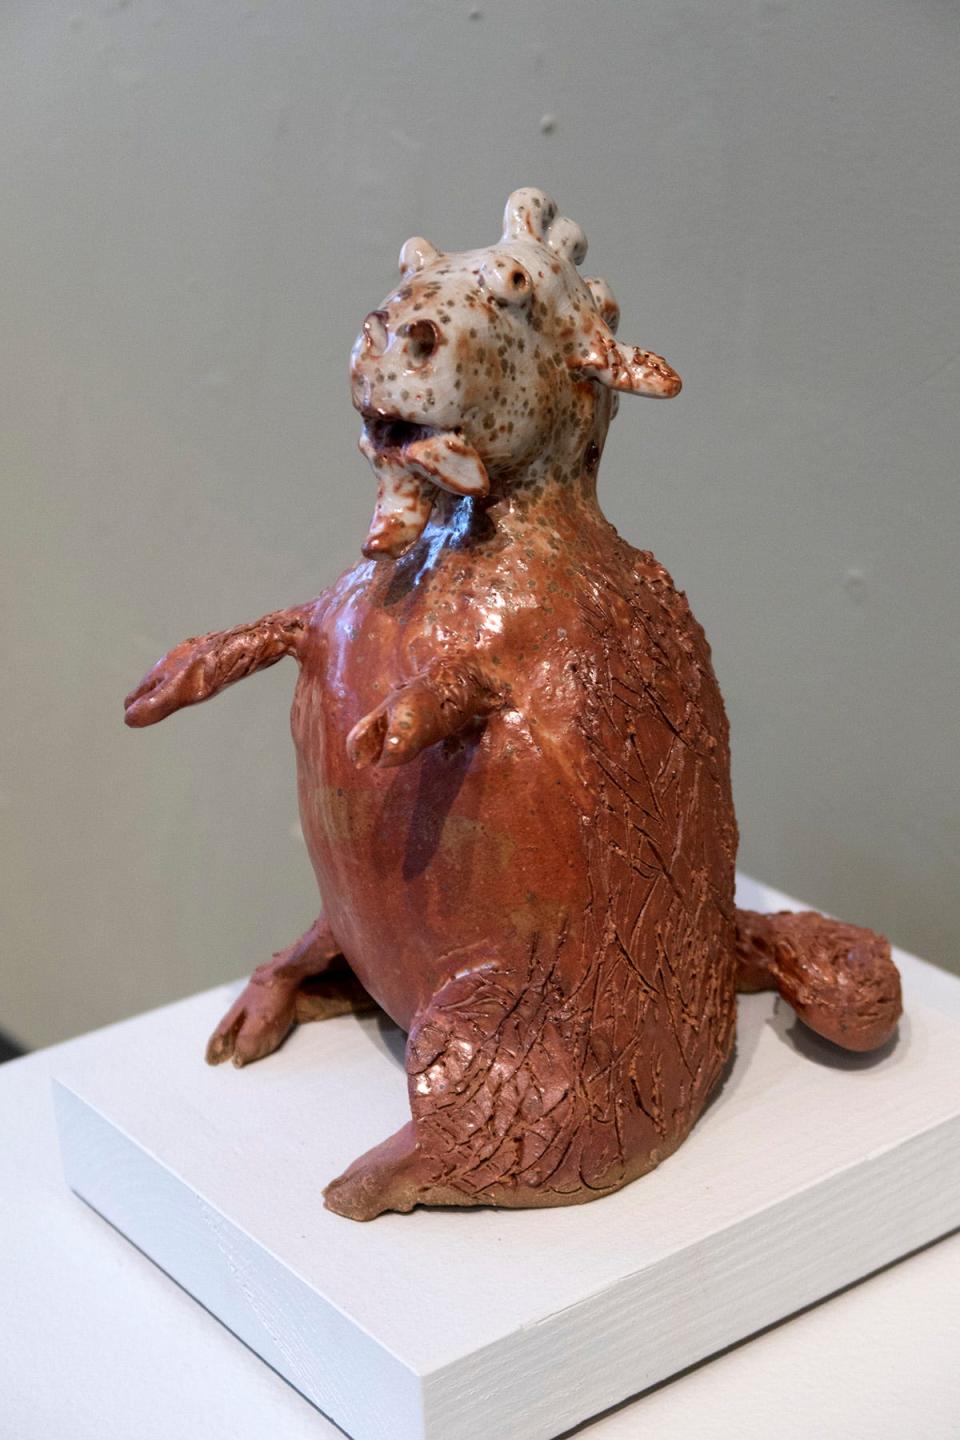 "Goat Boy" by Kathleen Reddy White is one of the works that will be included in Fire Arts’ seventh annual juried, titled "Vernal Reawakening," from April 7 through May 26, 2023, at the downtown South Bend art showroom and studio.